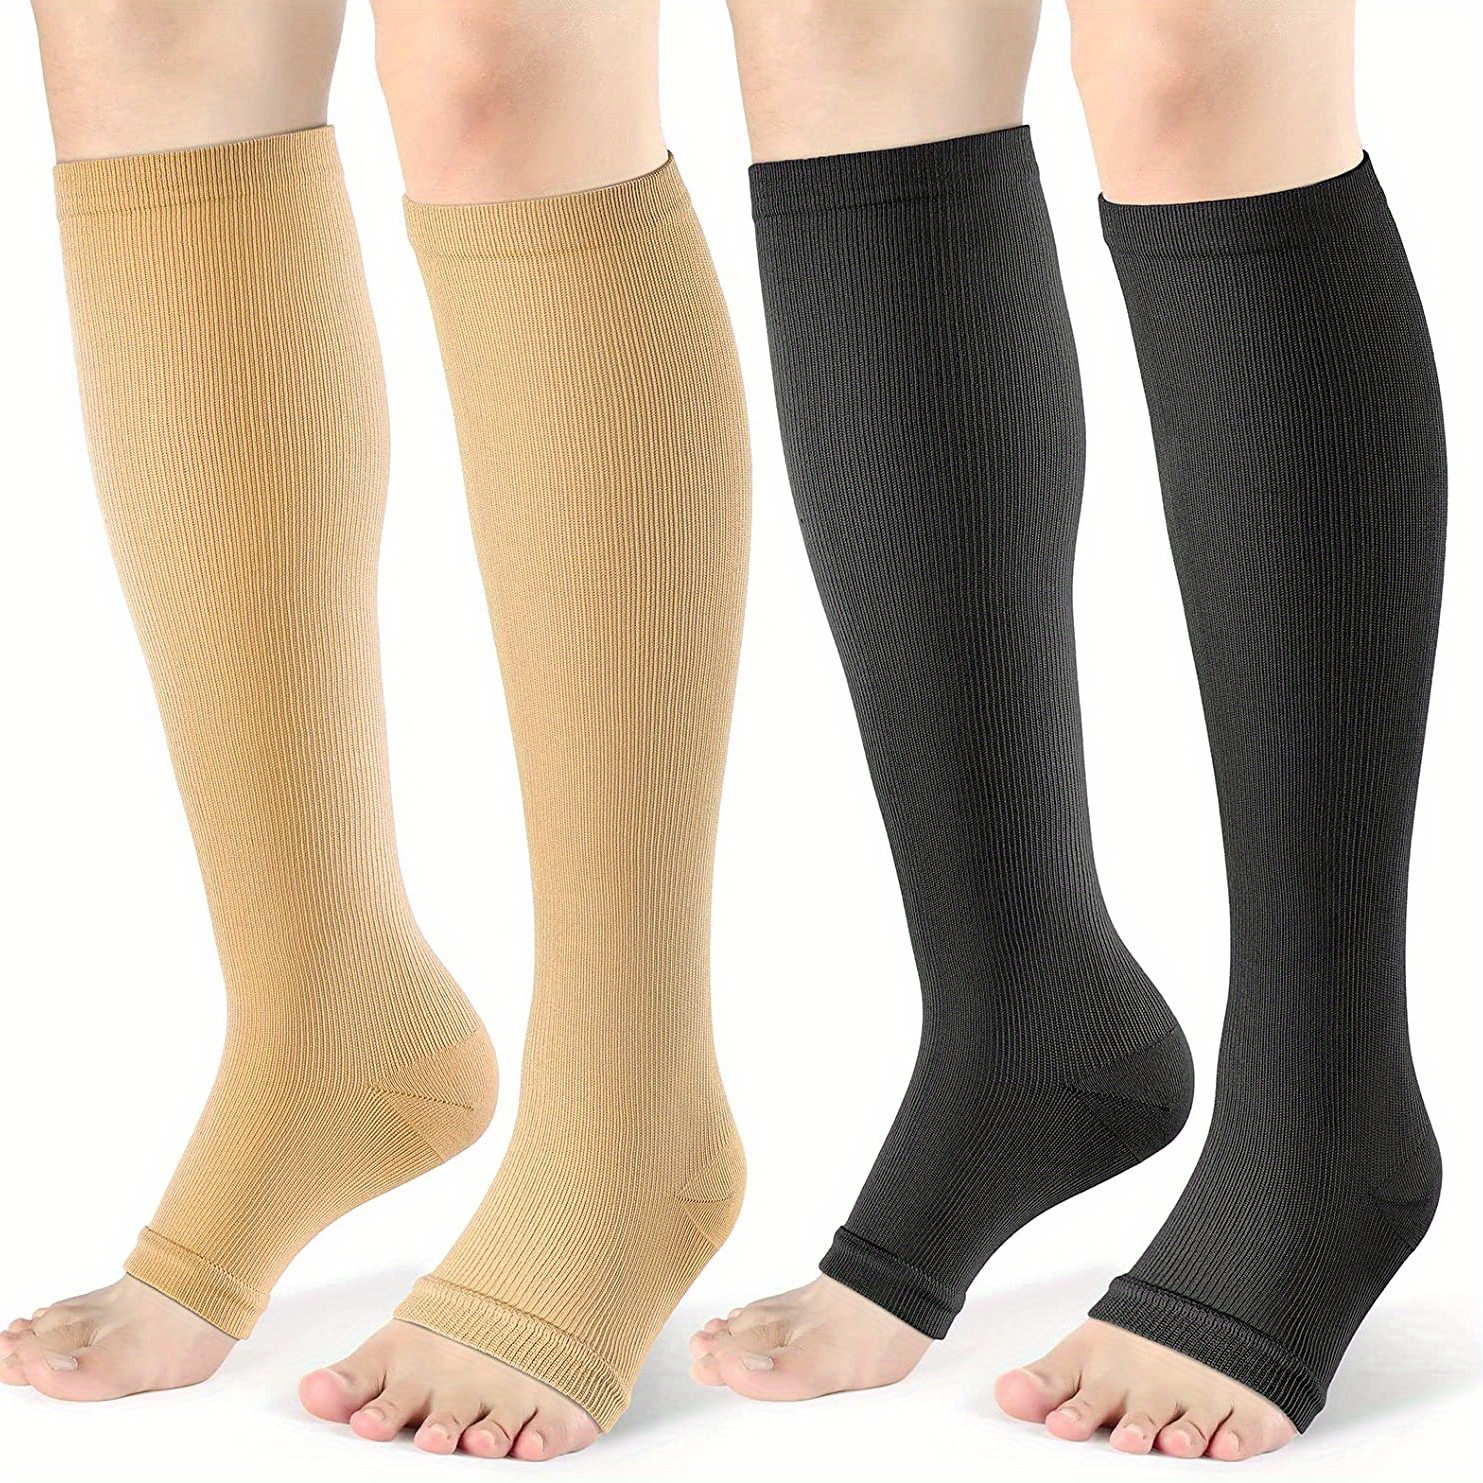 Knee-High Compression Socks Open Toe Elastic Sleeves and Stockings 1 Pair  20-30 mmHg Medical Compression Stockings Brown XXL